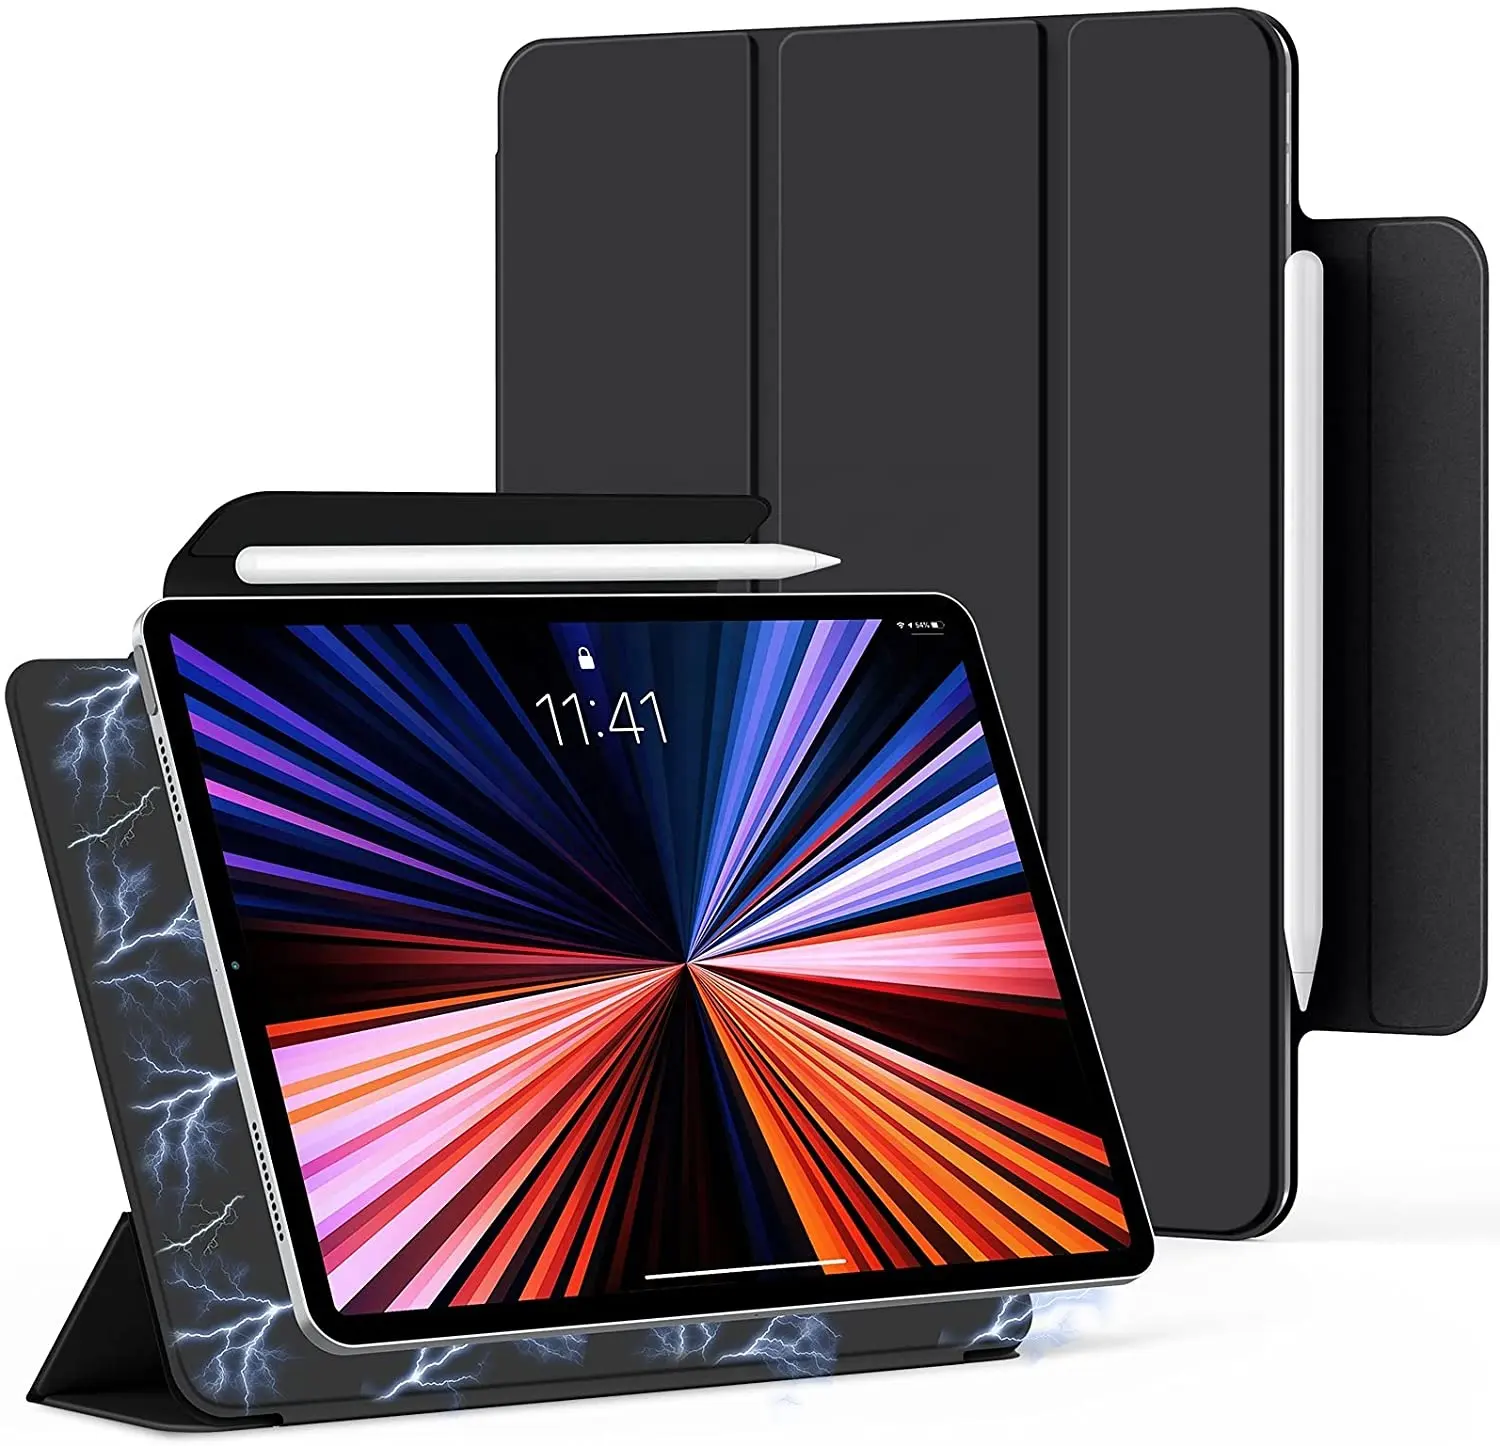 New Magic Magnetic Case Trifold Stand Magnetic Cover for iPad Pro 11 3rd Generation 2021 / iPad Air 4 / iPad Pro 11 2020 & 2018